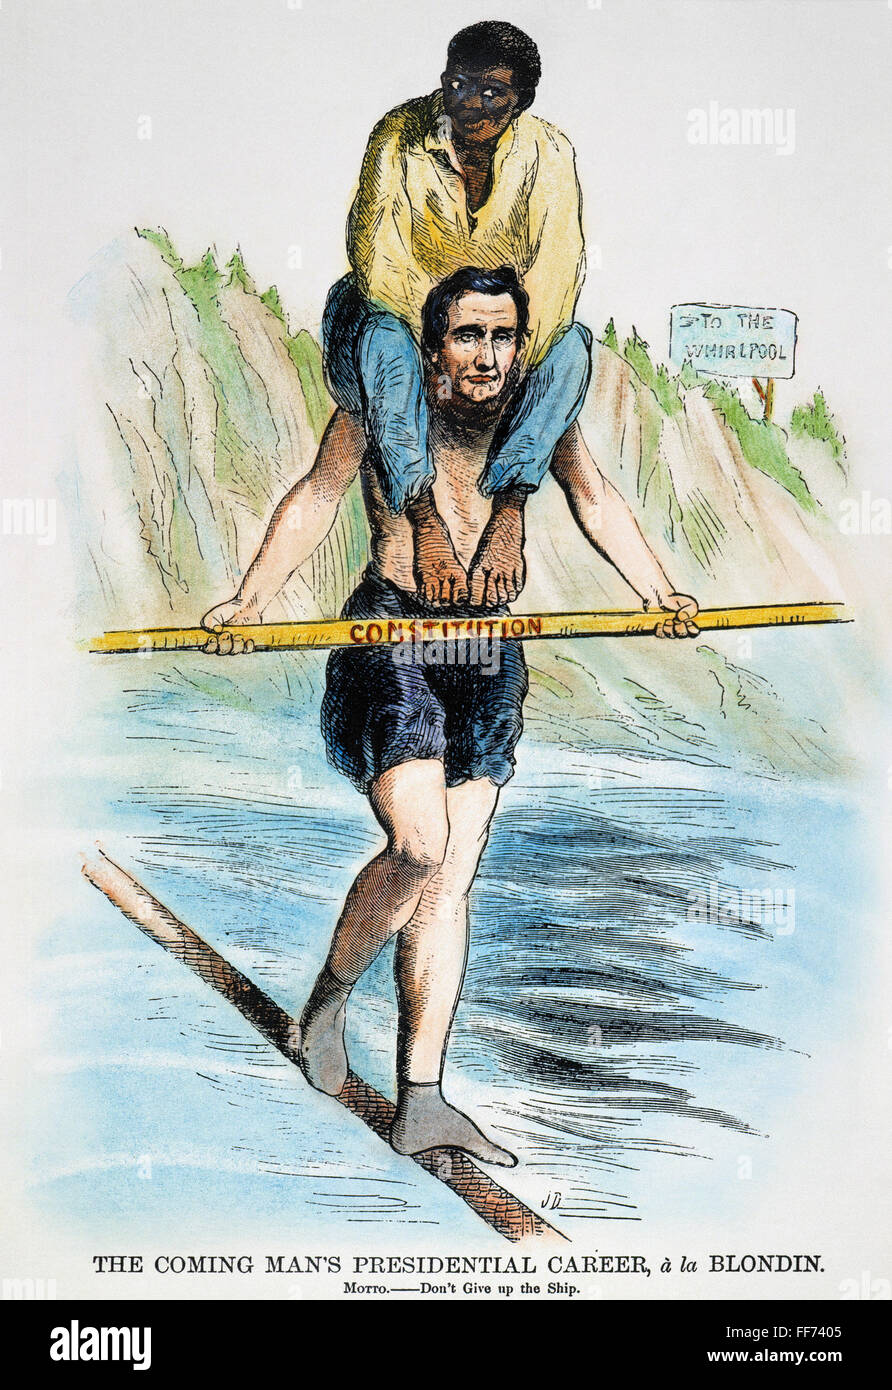 ABRAHAM LINCOLN. /nAn 1860 American cartoon comparing presidential candidate Abraham Lincoln to Charles Blondin, the French acrobat who crossed Niagara Falls on a tightrope ealier that year. Stock Photo